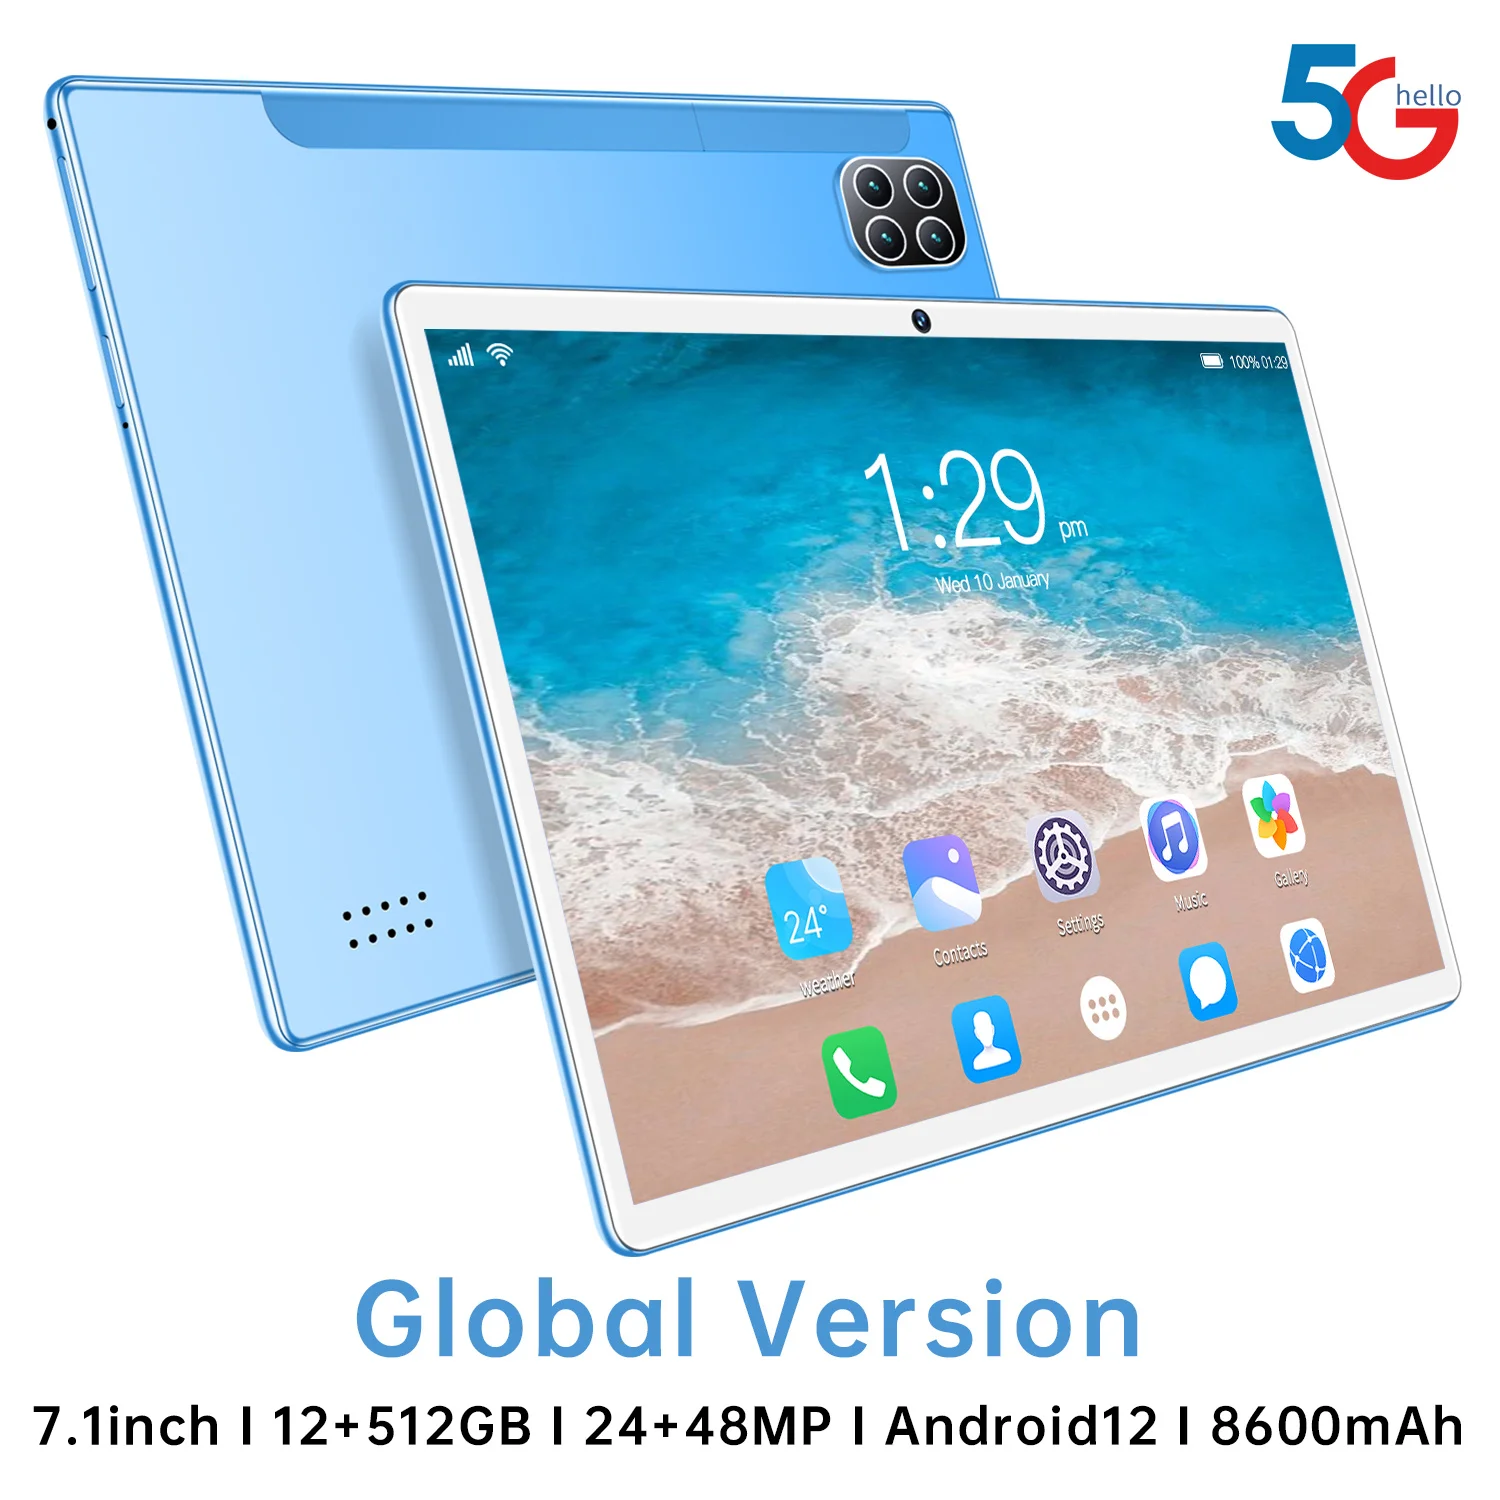 

Google Play Tablet H960 Android 12 8Inch PC 24+48MP Deca Core 8600mAh WIFI Global Version Pad 12GB 512GB Hot Sales Laptop